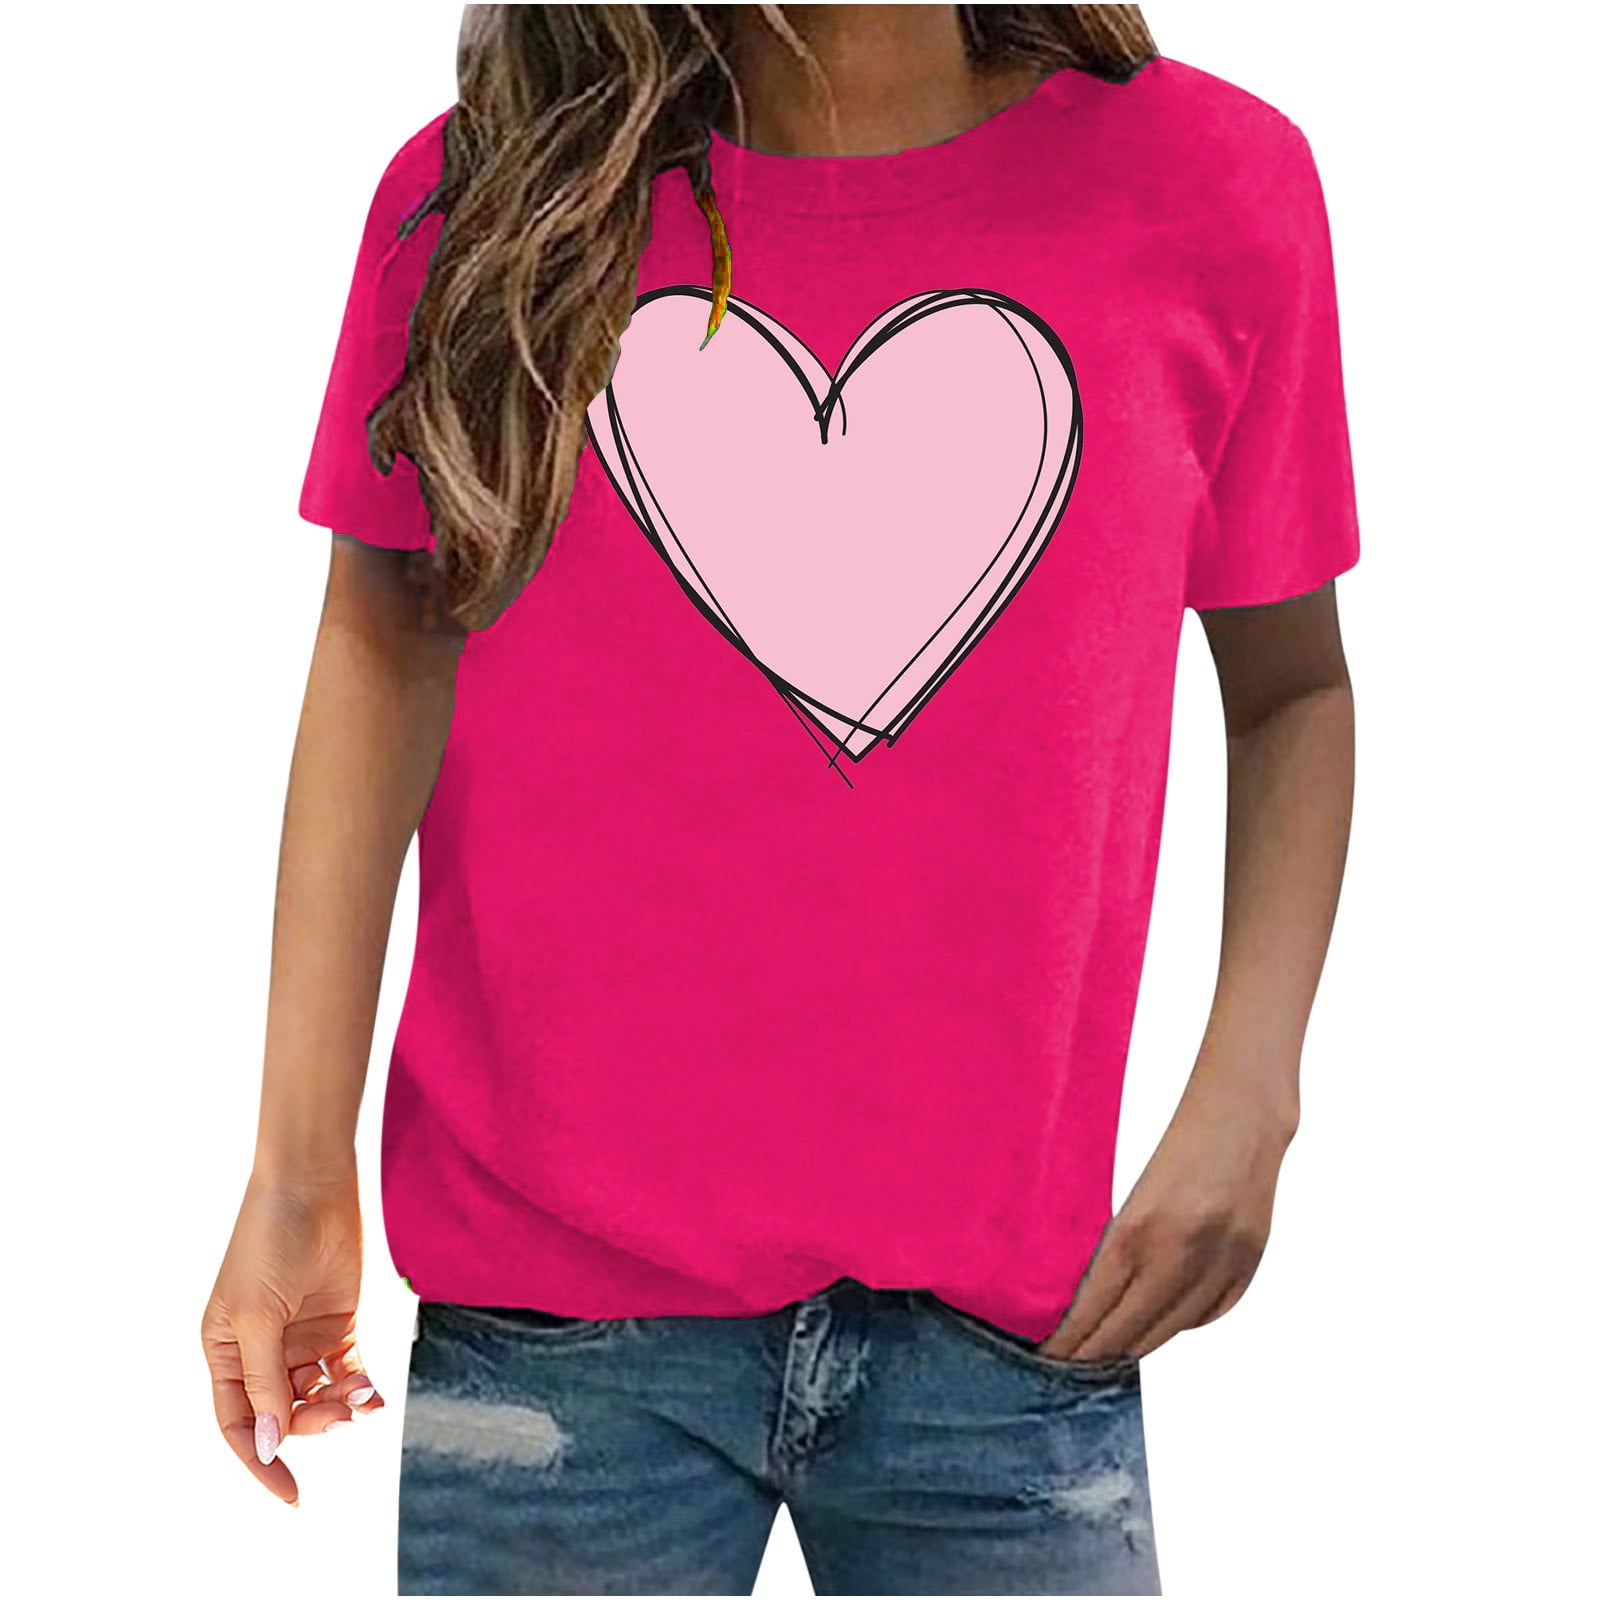 Jalioing Womens Valentine's Day T-Shirt Short Sleeved Top Heart Printed  Round Neck Blouse Shirt (3X-Large, Hot Pink)